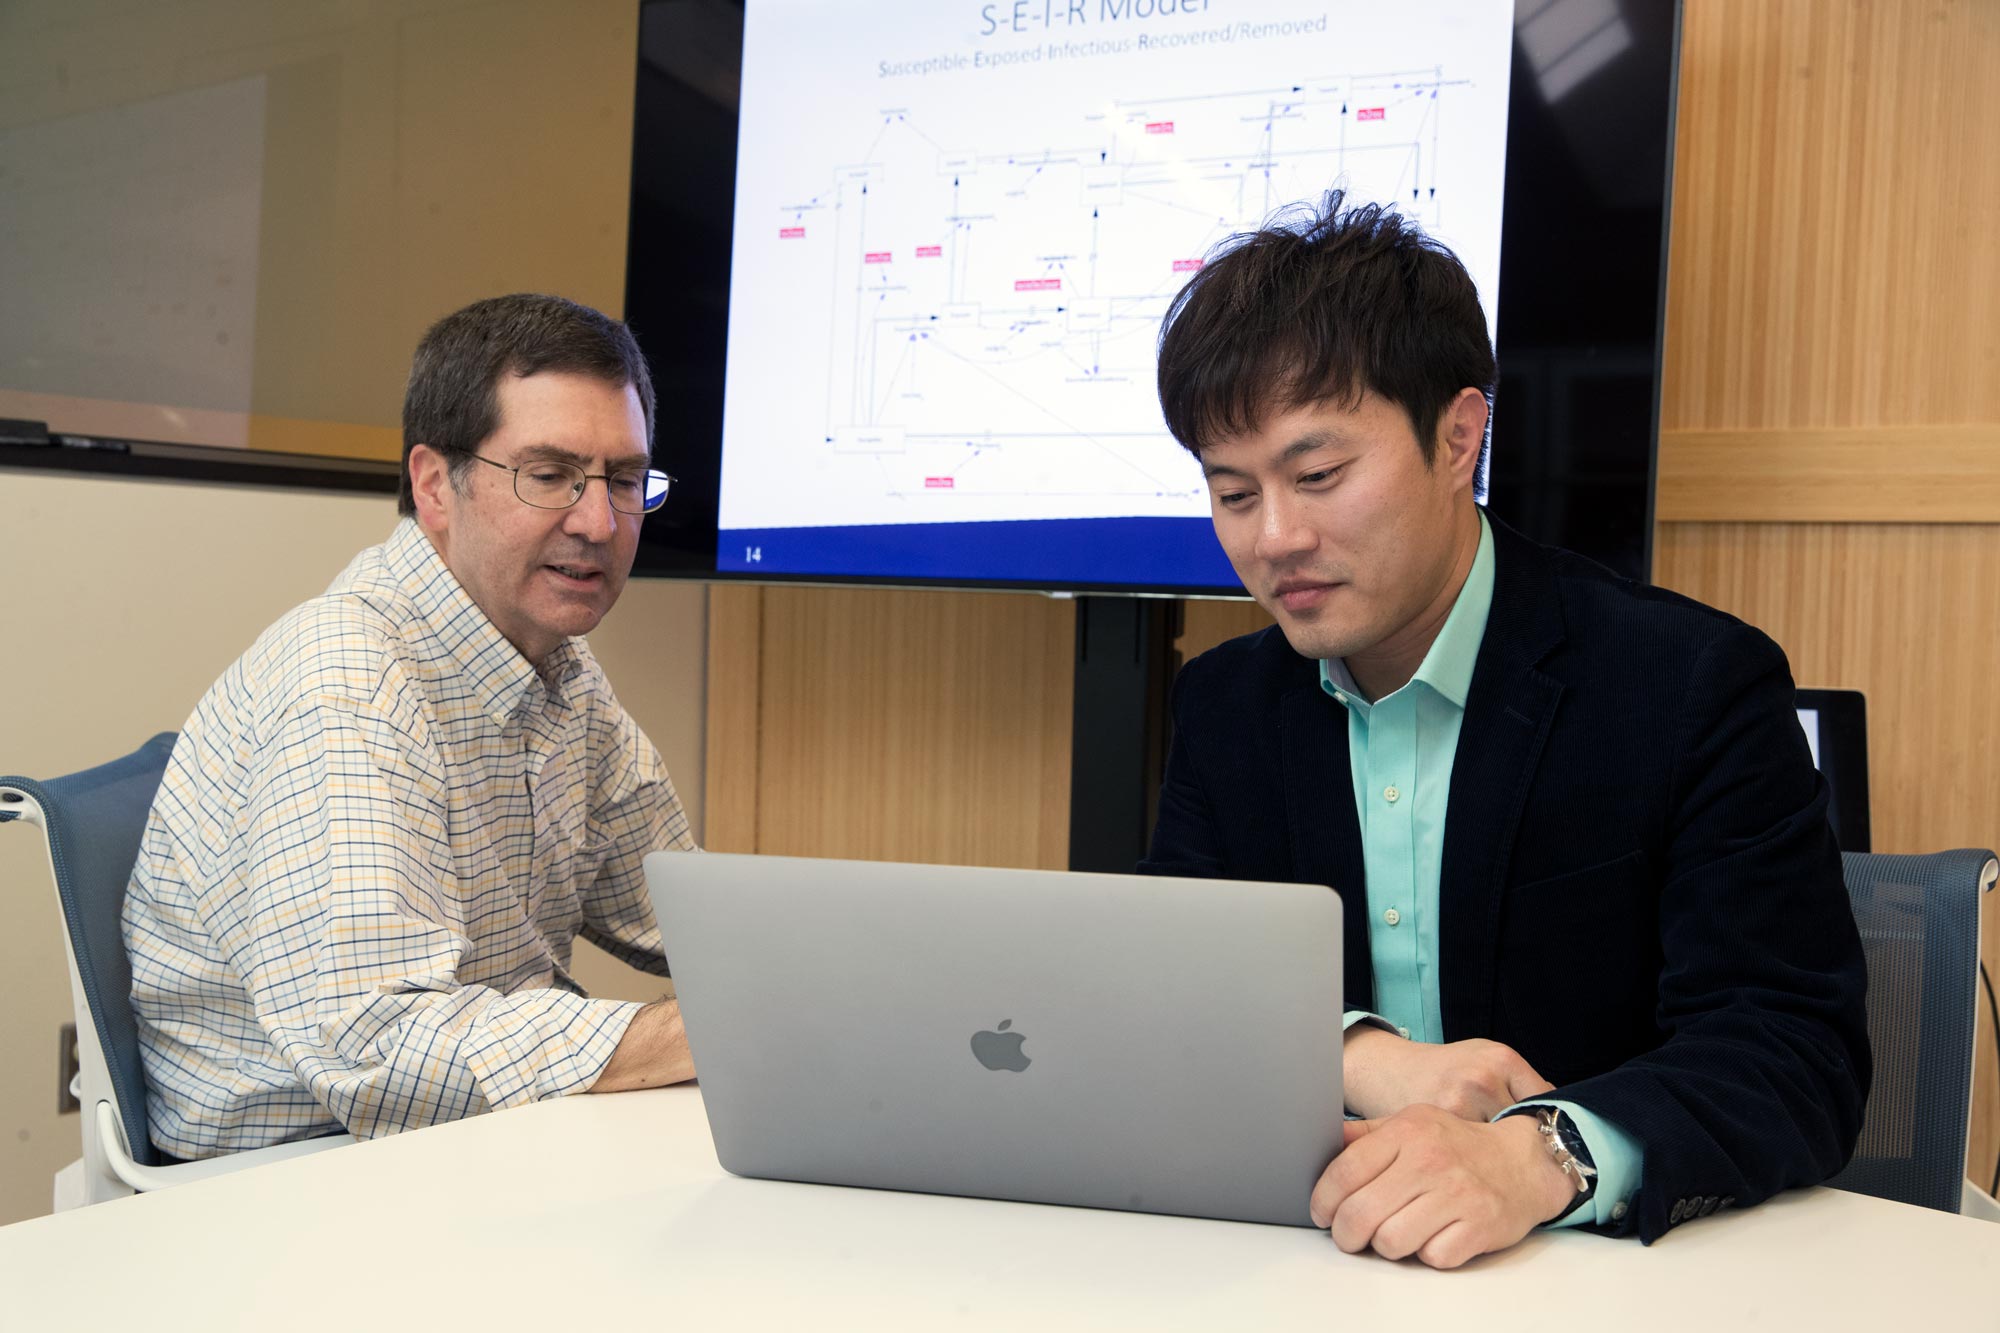 Myung and senior engineer Andy Ortiz, left, working on a computer toghether